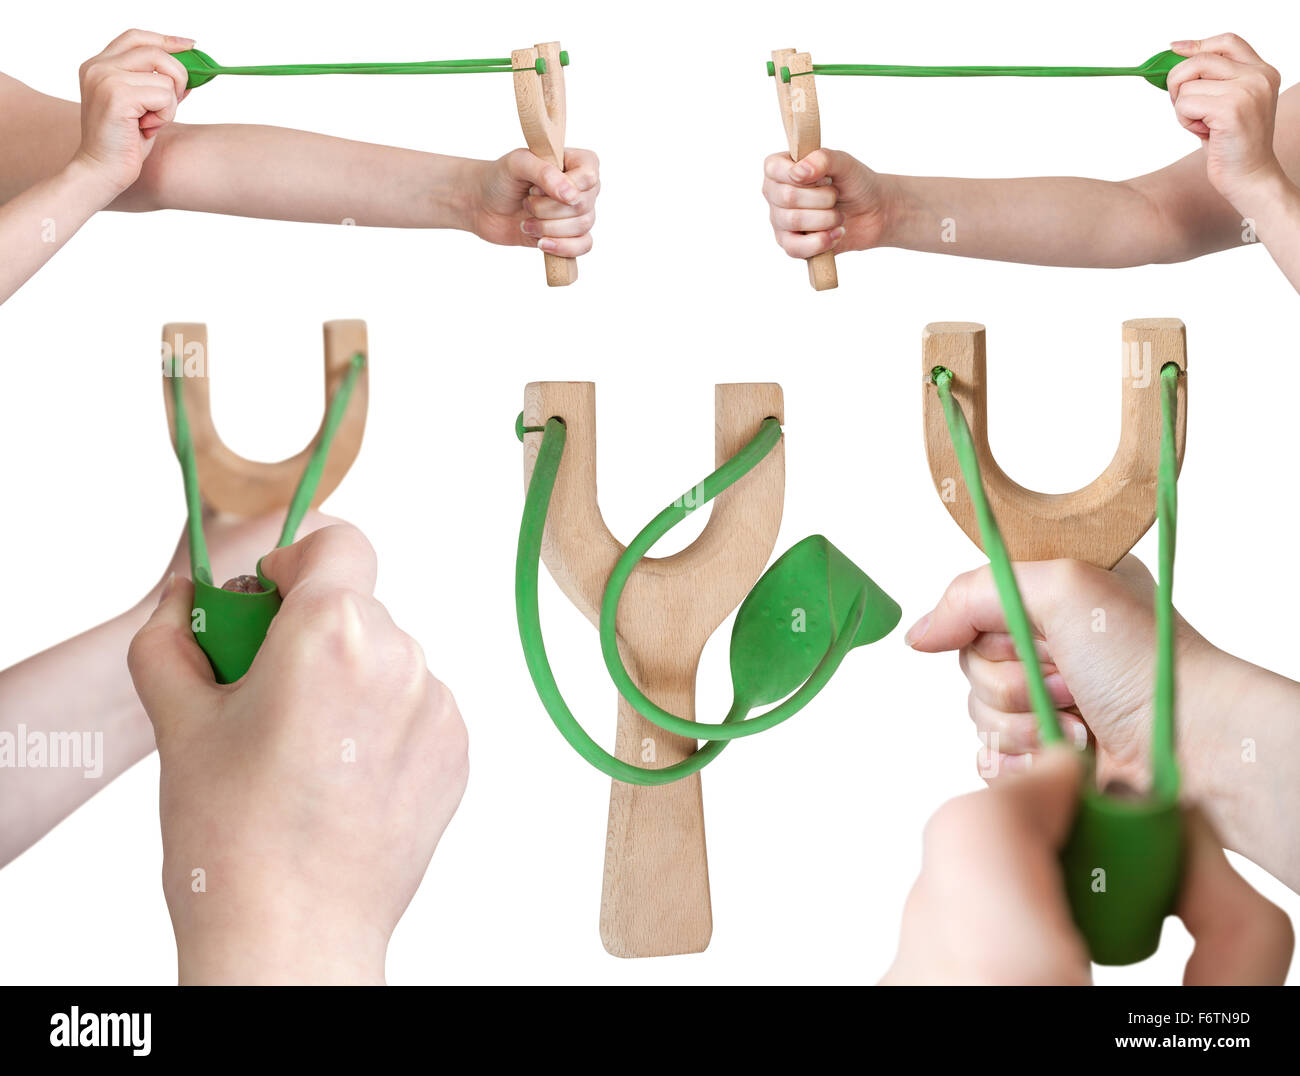 set of hands with simple wooden slingshot isolated on white background Stock Photo